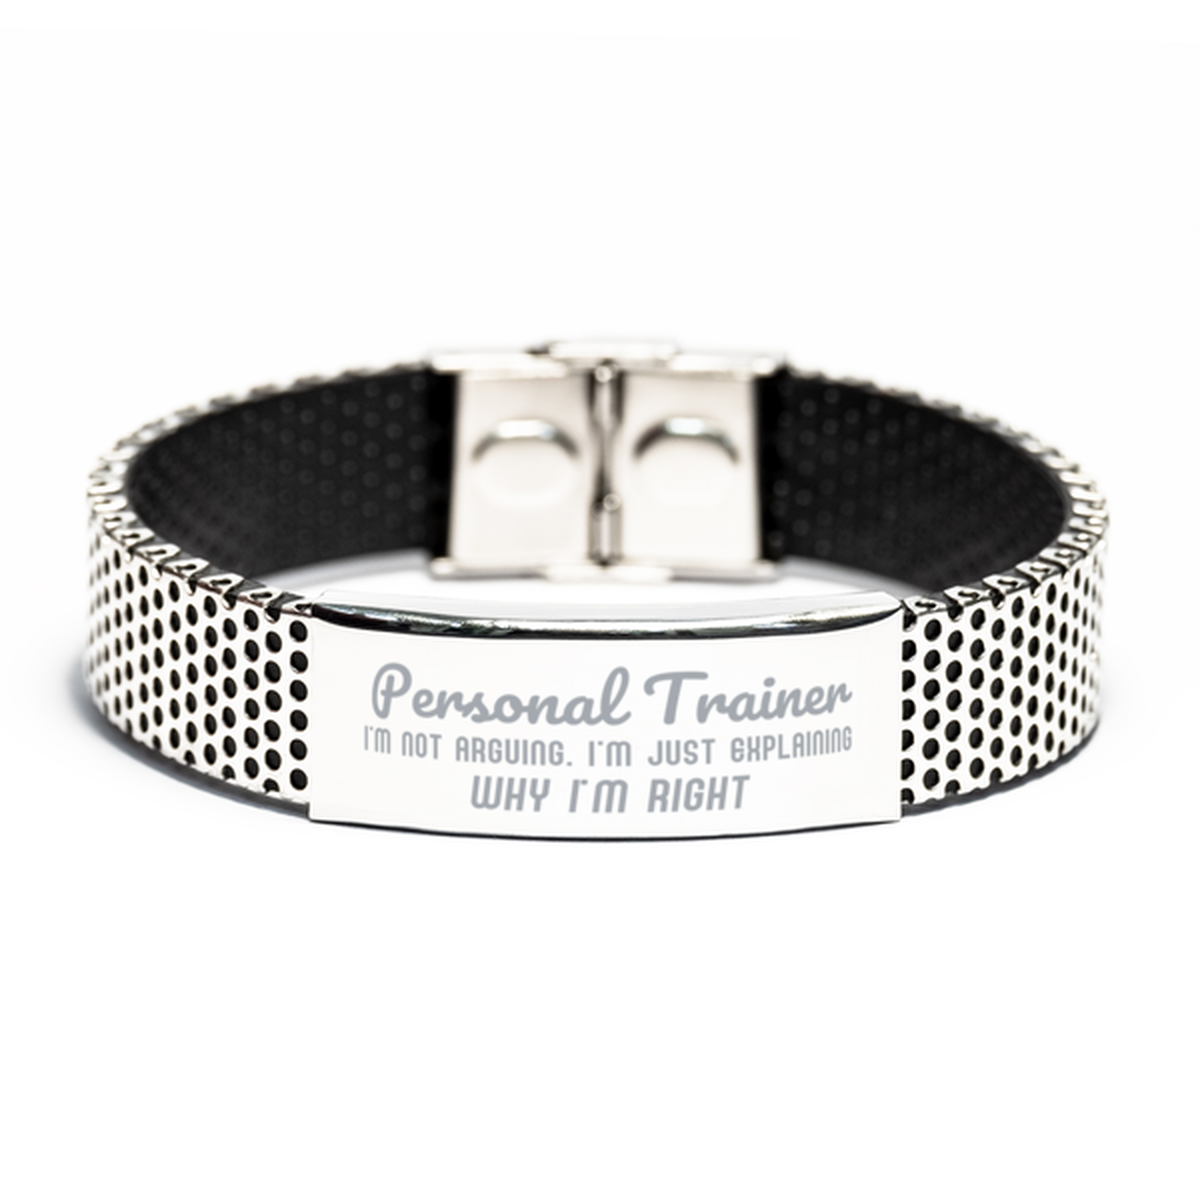 Personal Trainer I'm not Arguing. I'm Just Explaining Why I'm RIGHT Stainless Steel Bracelet, Funny Saying Quote Personal Trainer Gifts For Personal Trainer Graduation Birthday Christmas Gifts for Men Women Coworker